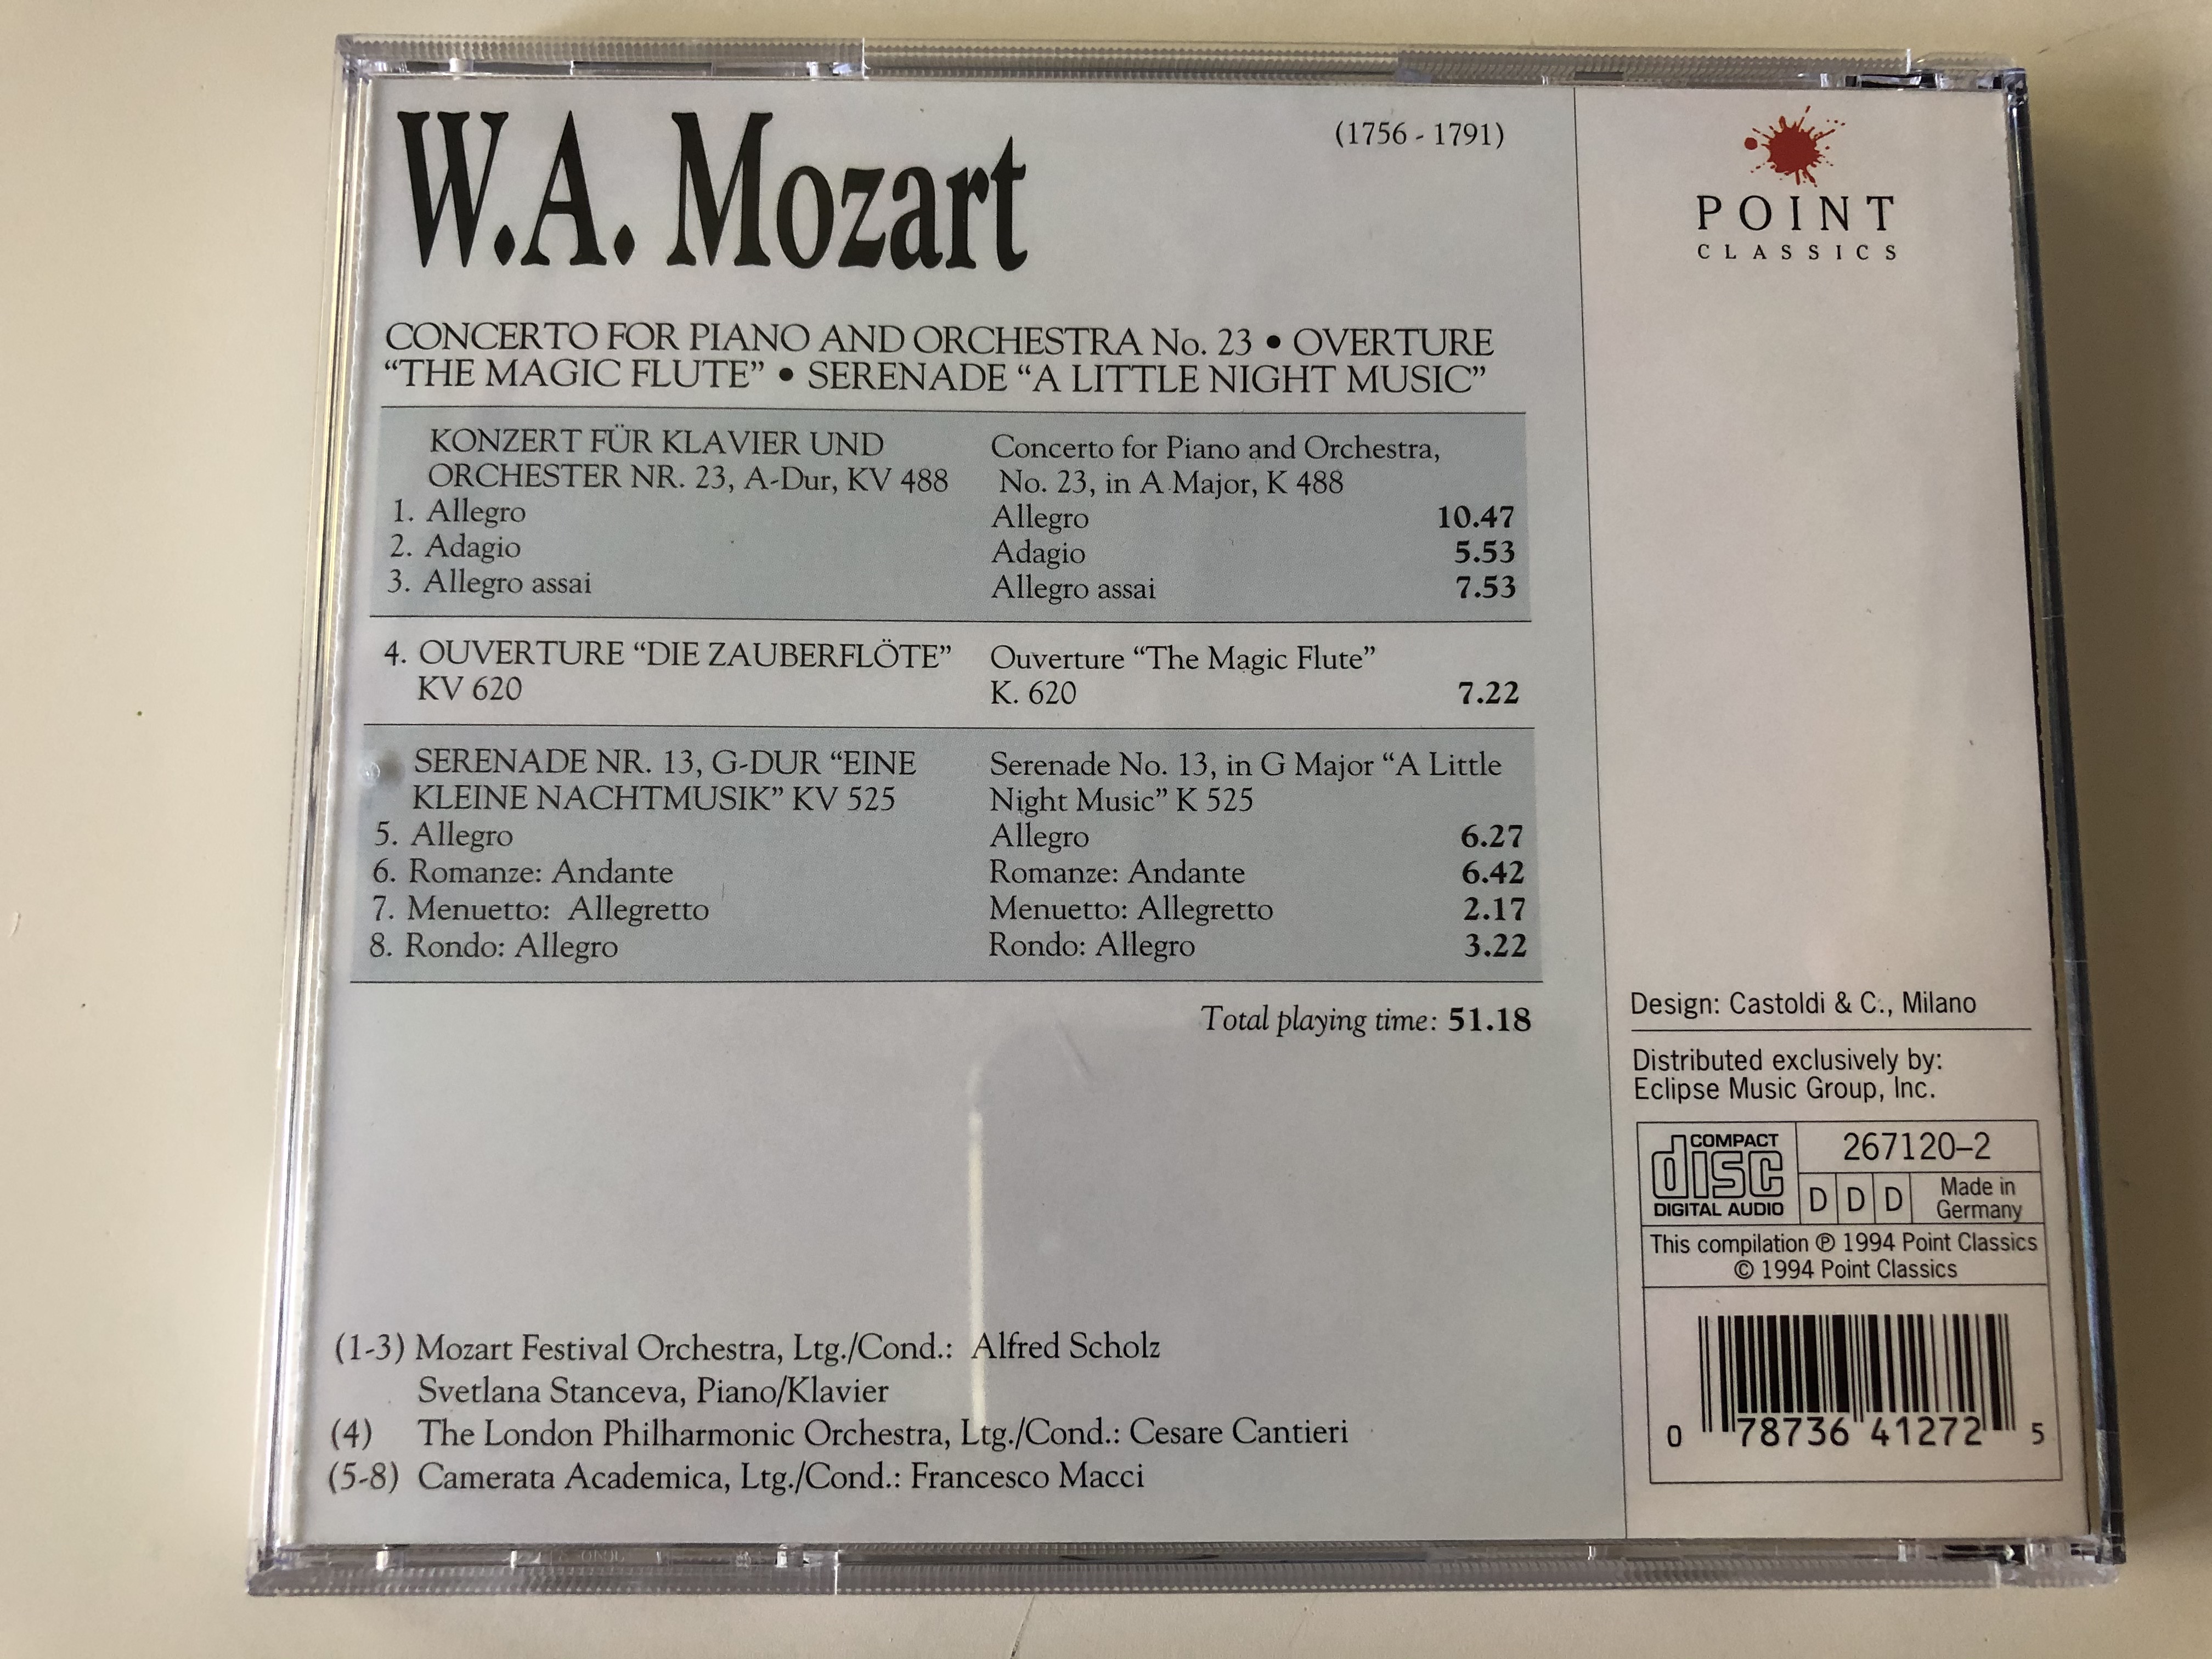 mozart-concerto-for-piano-and-orchestra-no.-23-overture-the-magic-flute-serenade-a-little-night-music-point-classics-audio-cd-1994-2671202-5-.jpg